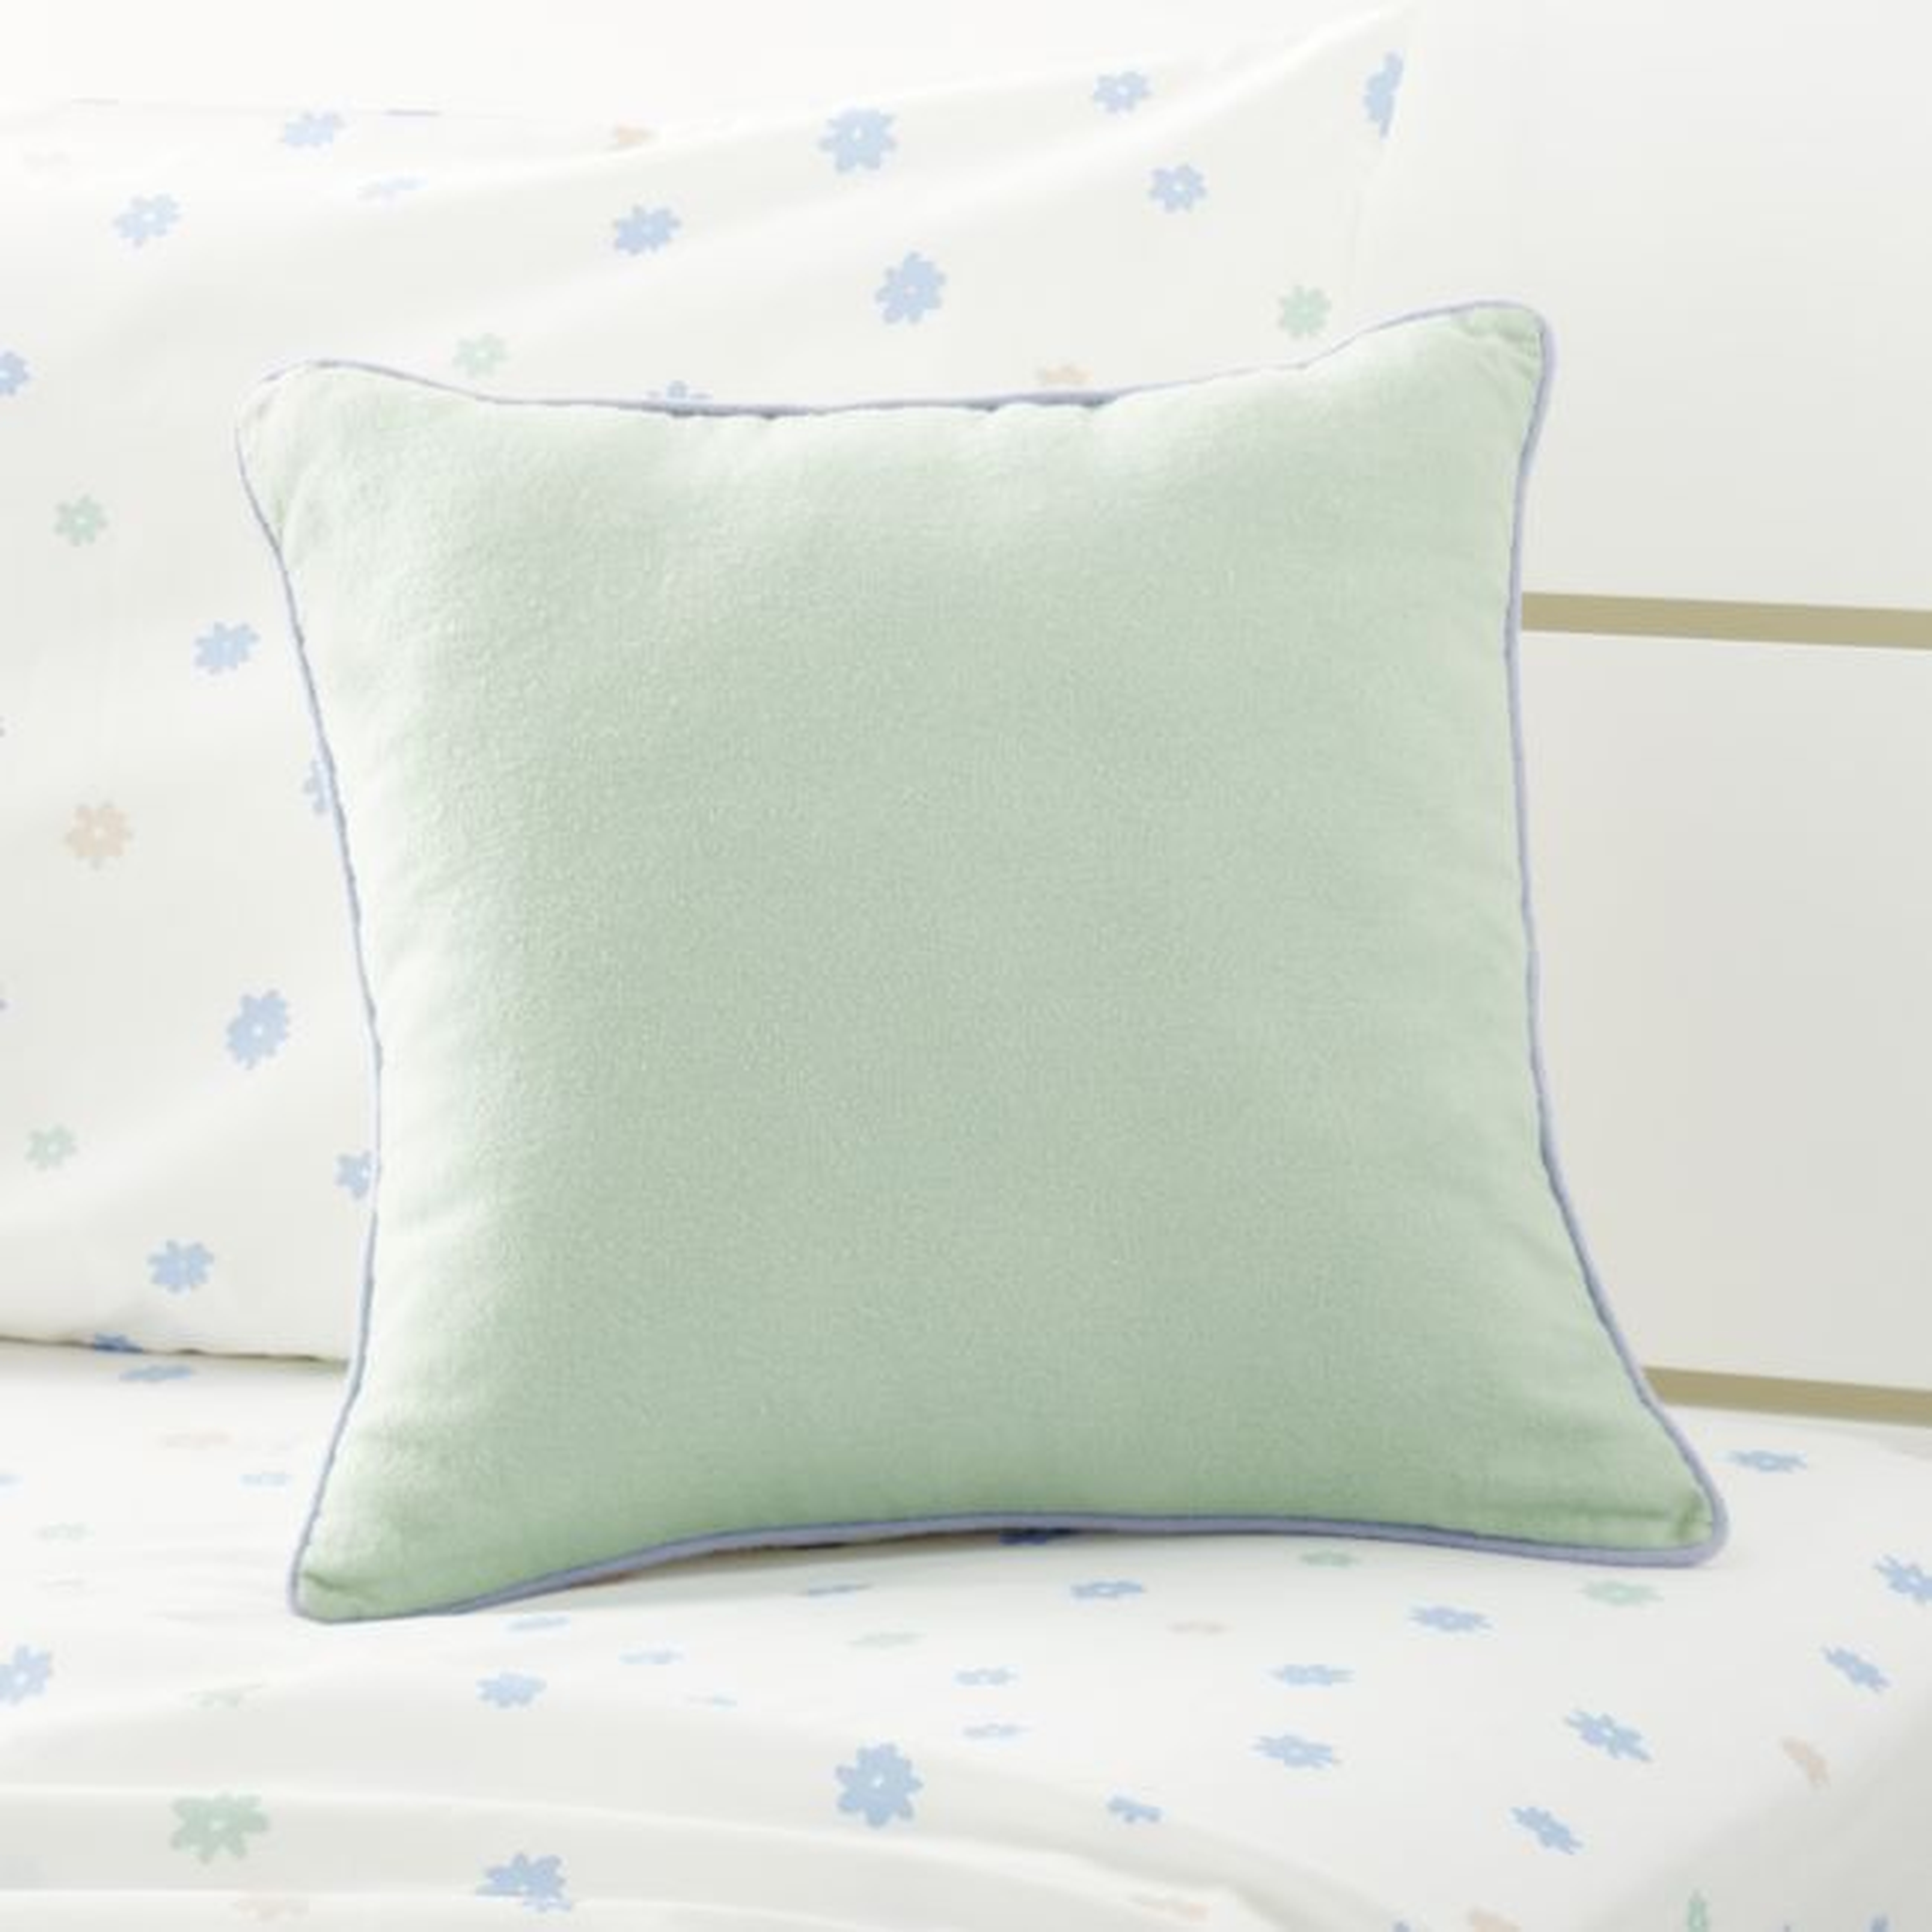 Mint and White Modern Pillow - Crate and Barrel